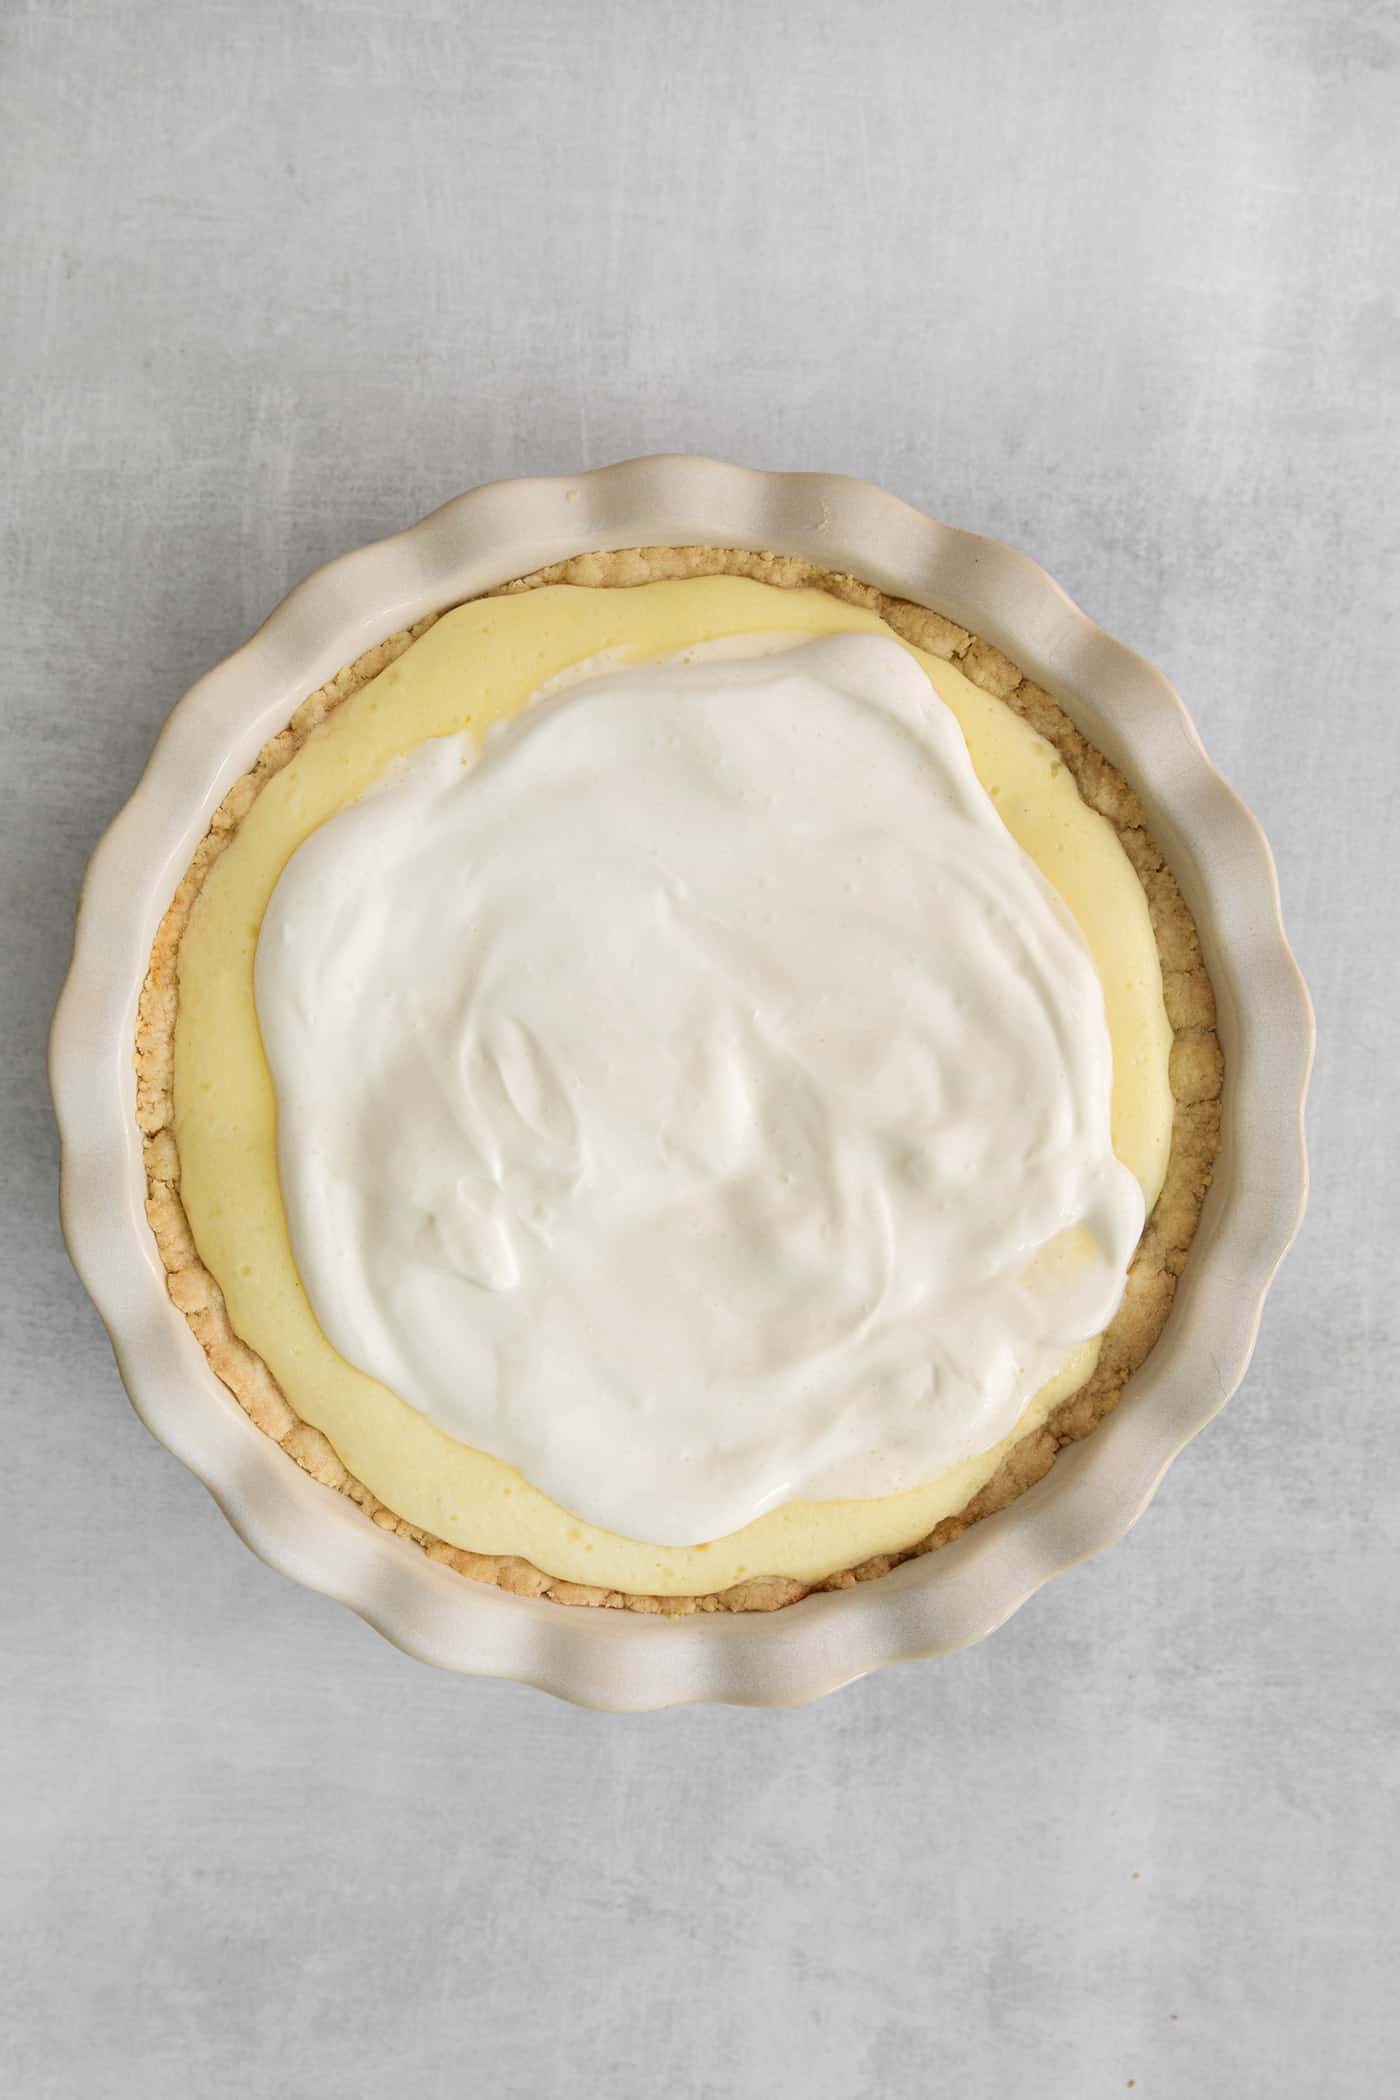 sour cream layer spread over cheesecake layer on pie